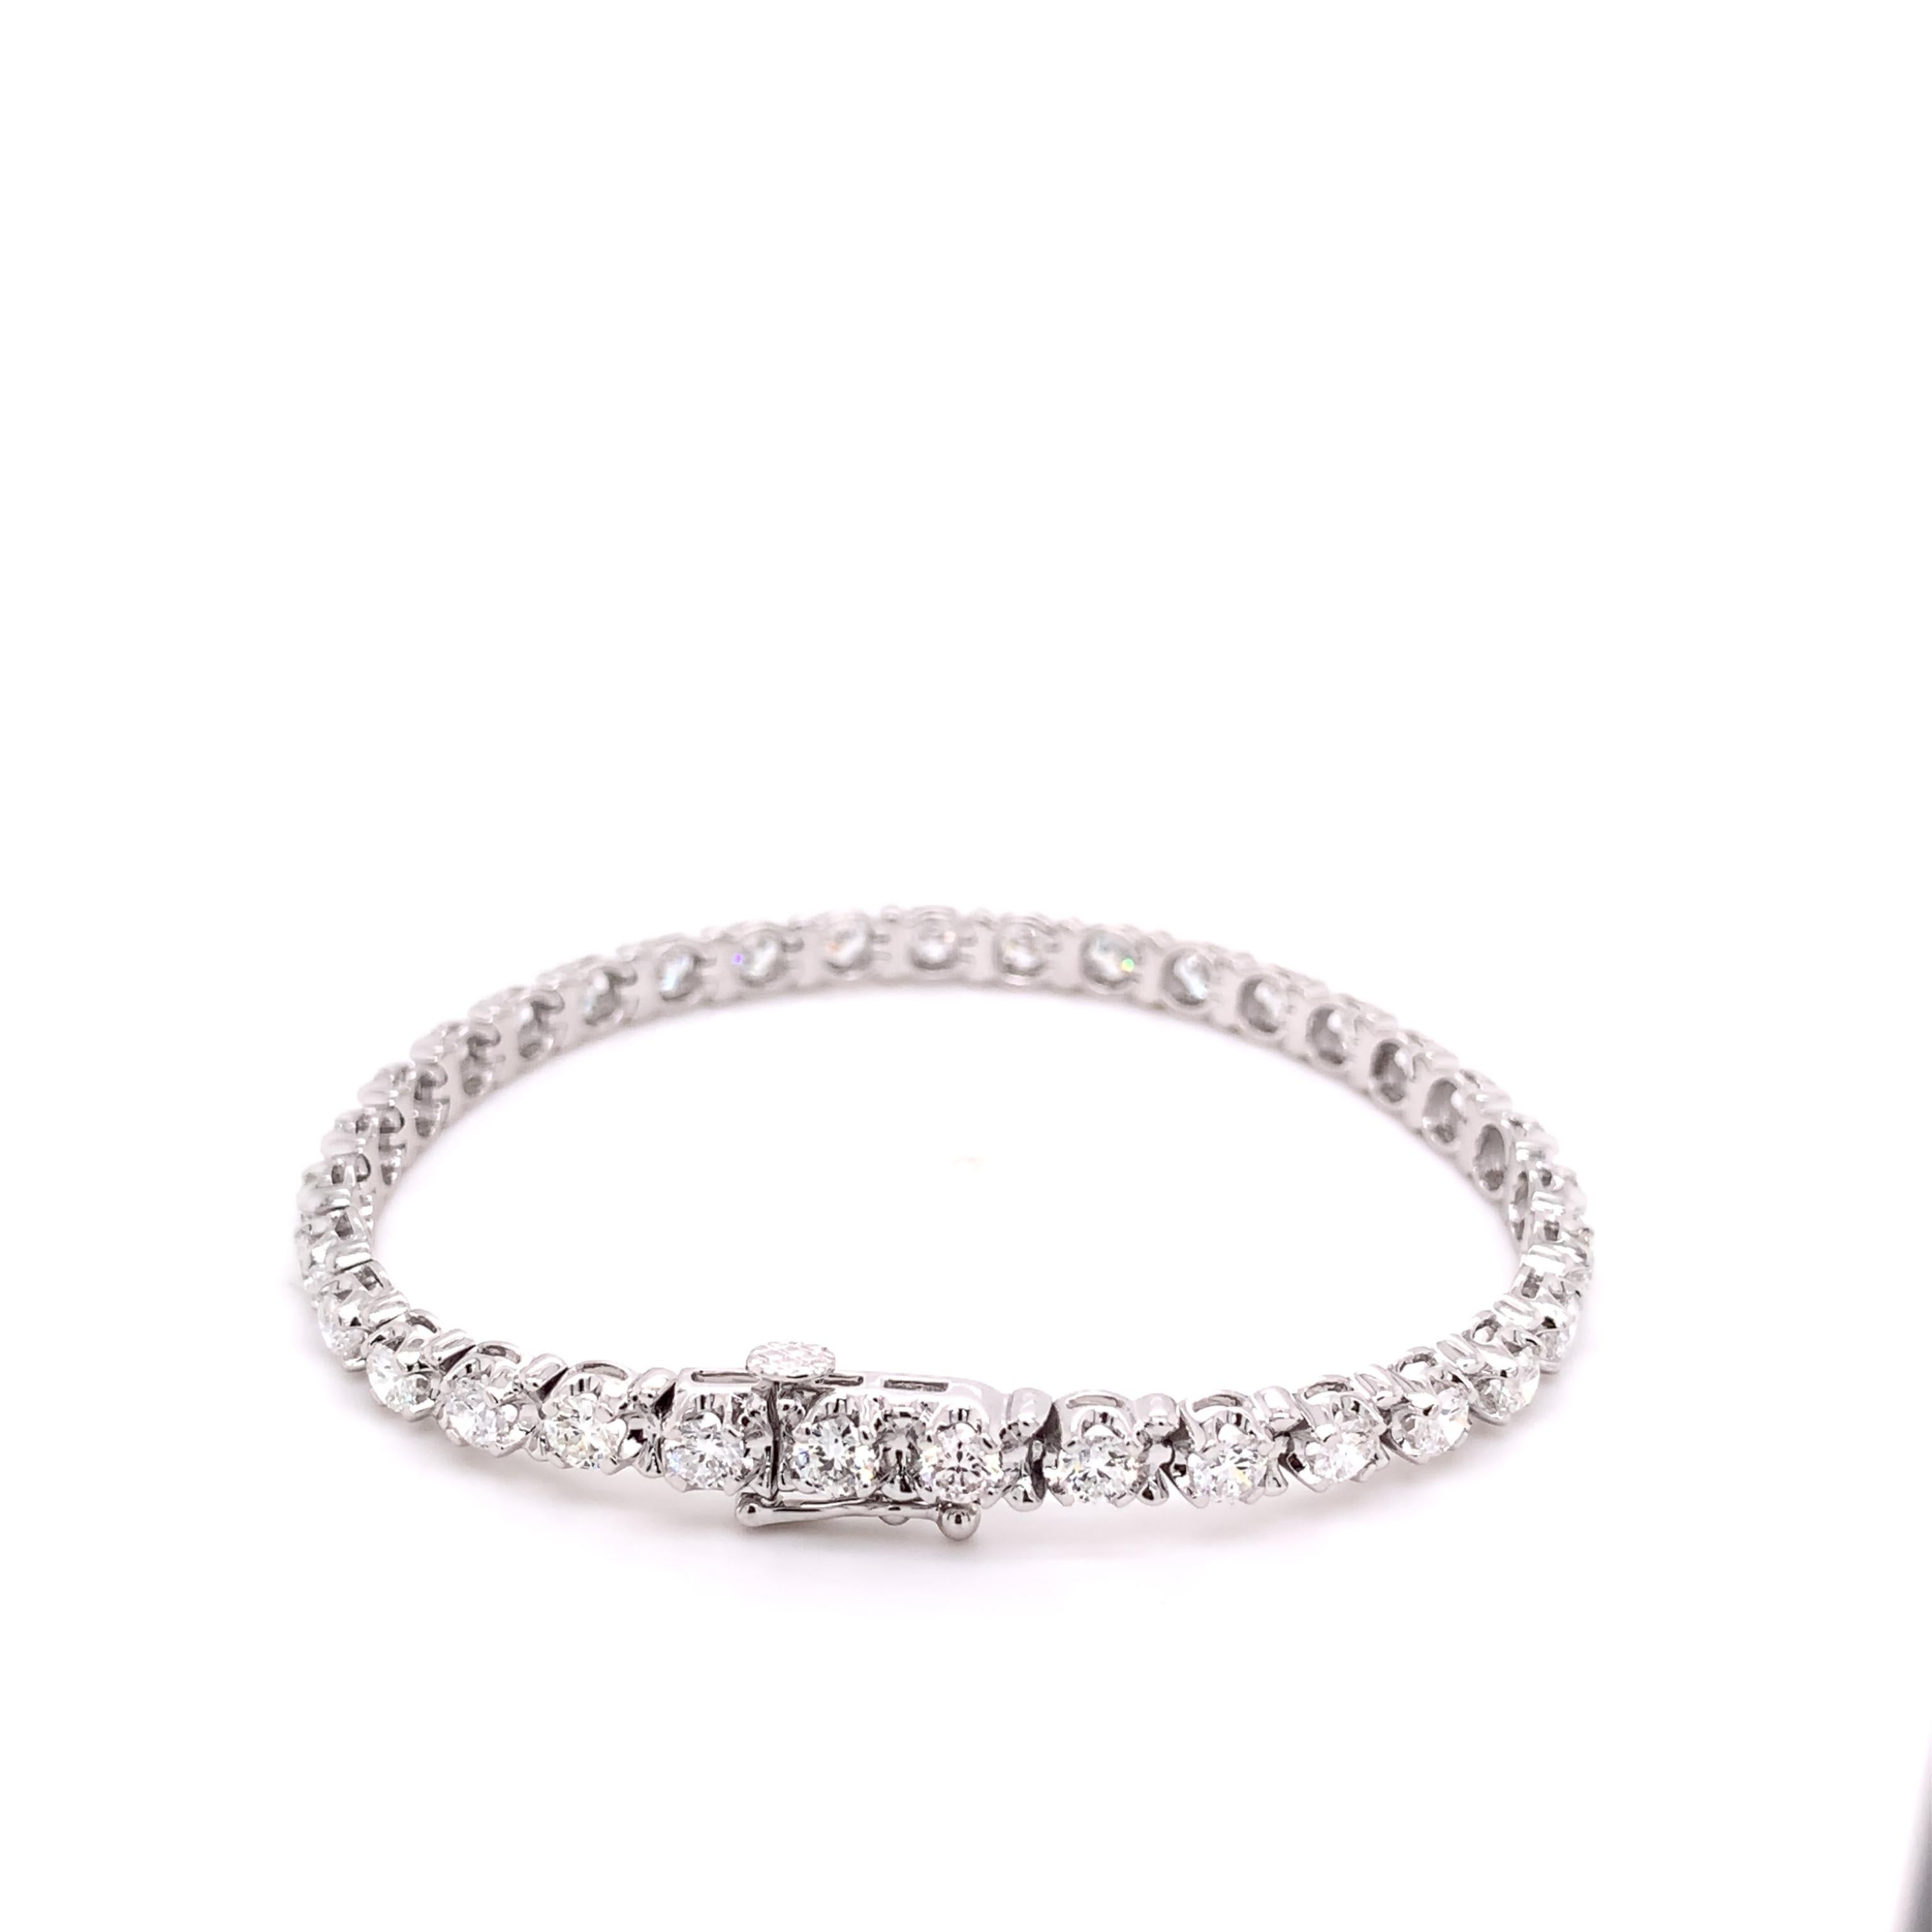 This lab grown bracelet is absolutely stunning and filled with sparkle! It was definitely designed for someone special. It features a total of 34 round prong set lab grown diamonds totaling 5.12 carats (E-F color, VS1 clarity) crafted in luxurious